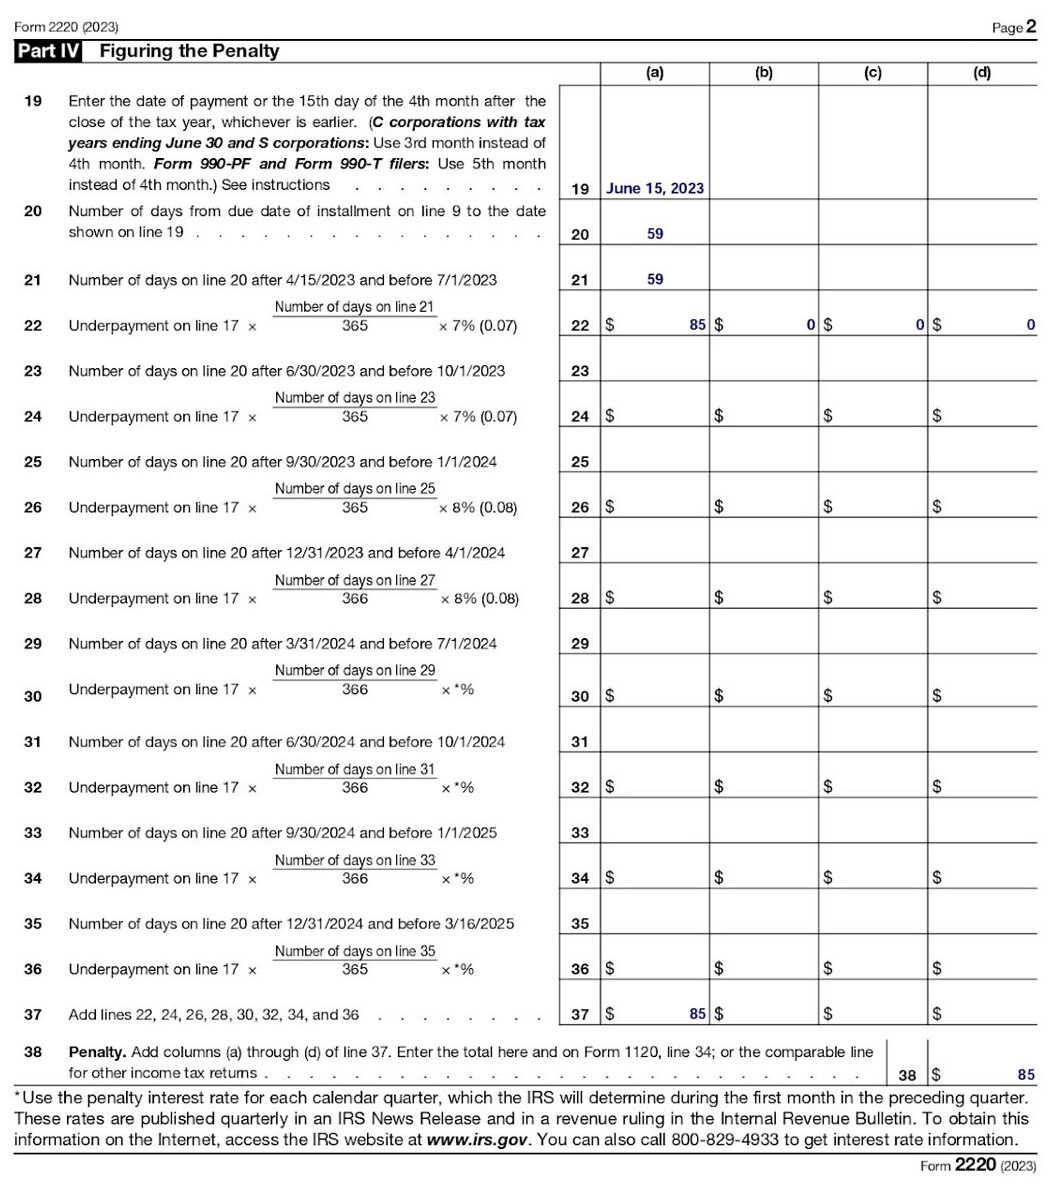 A completed Form 2220, Page 2, with sample data.